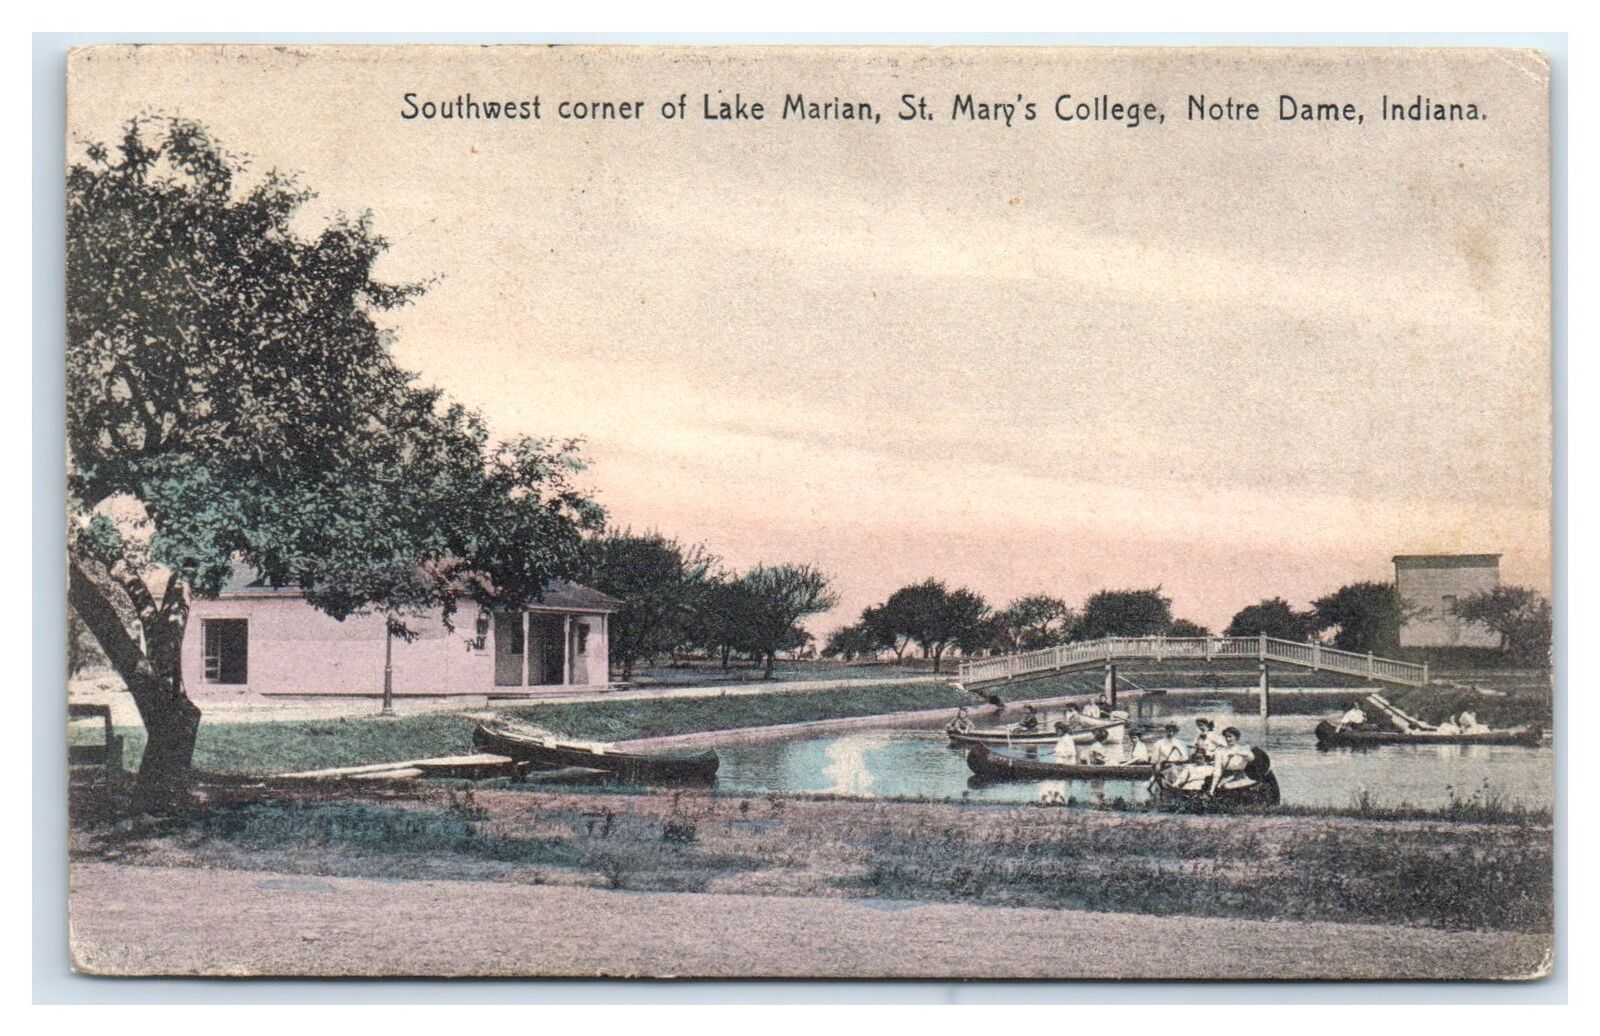 1911 NOTRE DAME, IN Postcard-  SOUTHWEST CORNER OF LAKE MARIAN ST MARYS COLLEGE